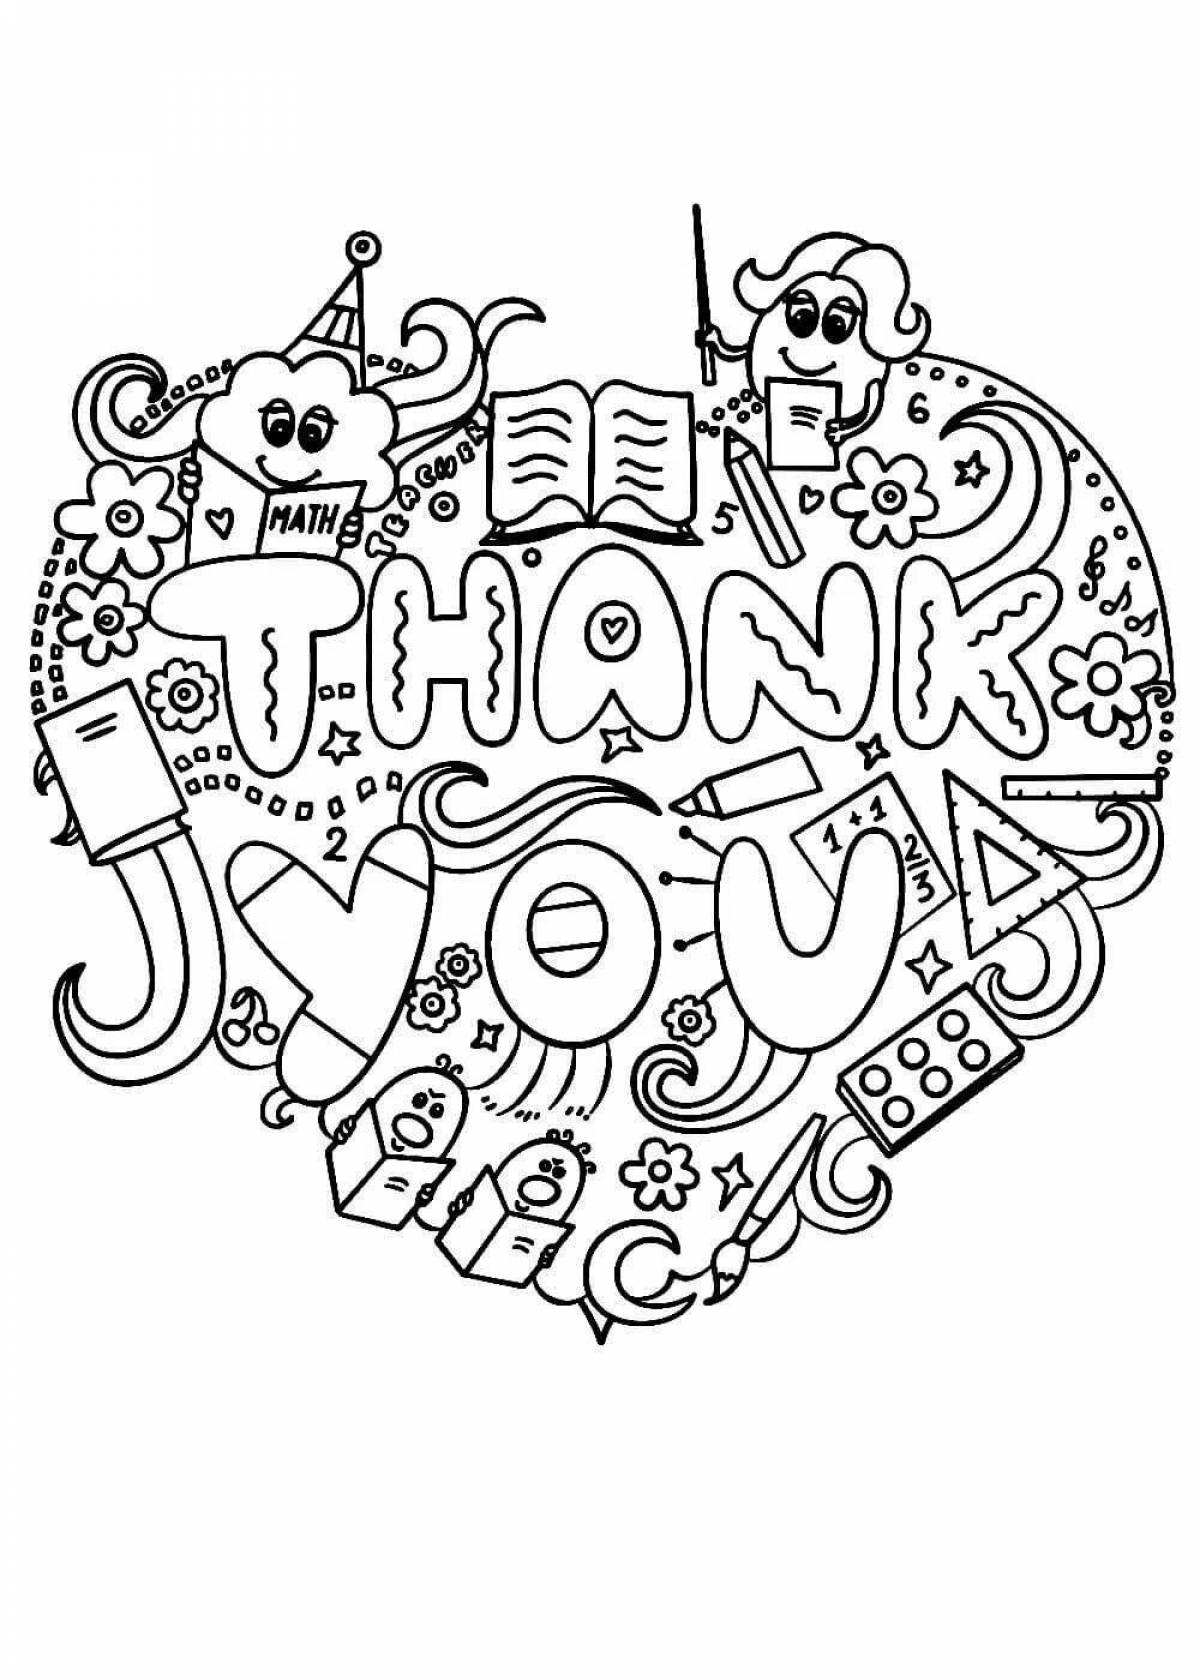 Joyfilled world thank you day coloring page